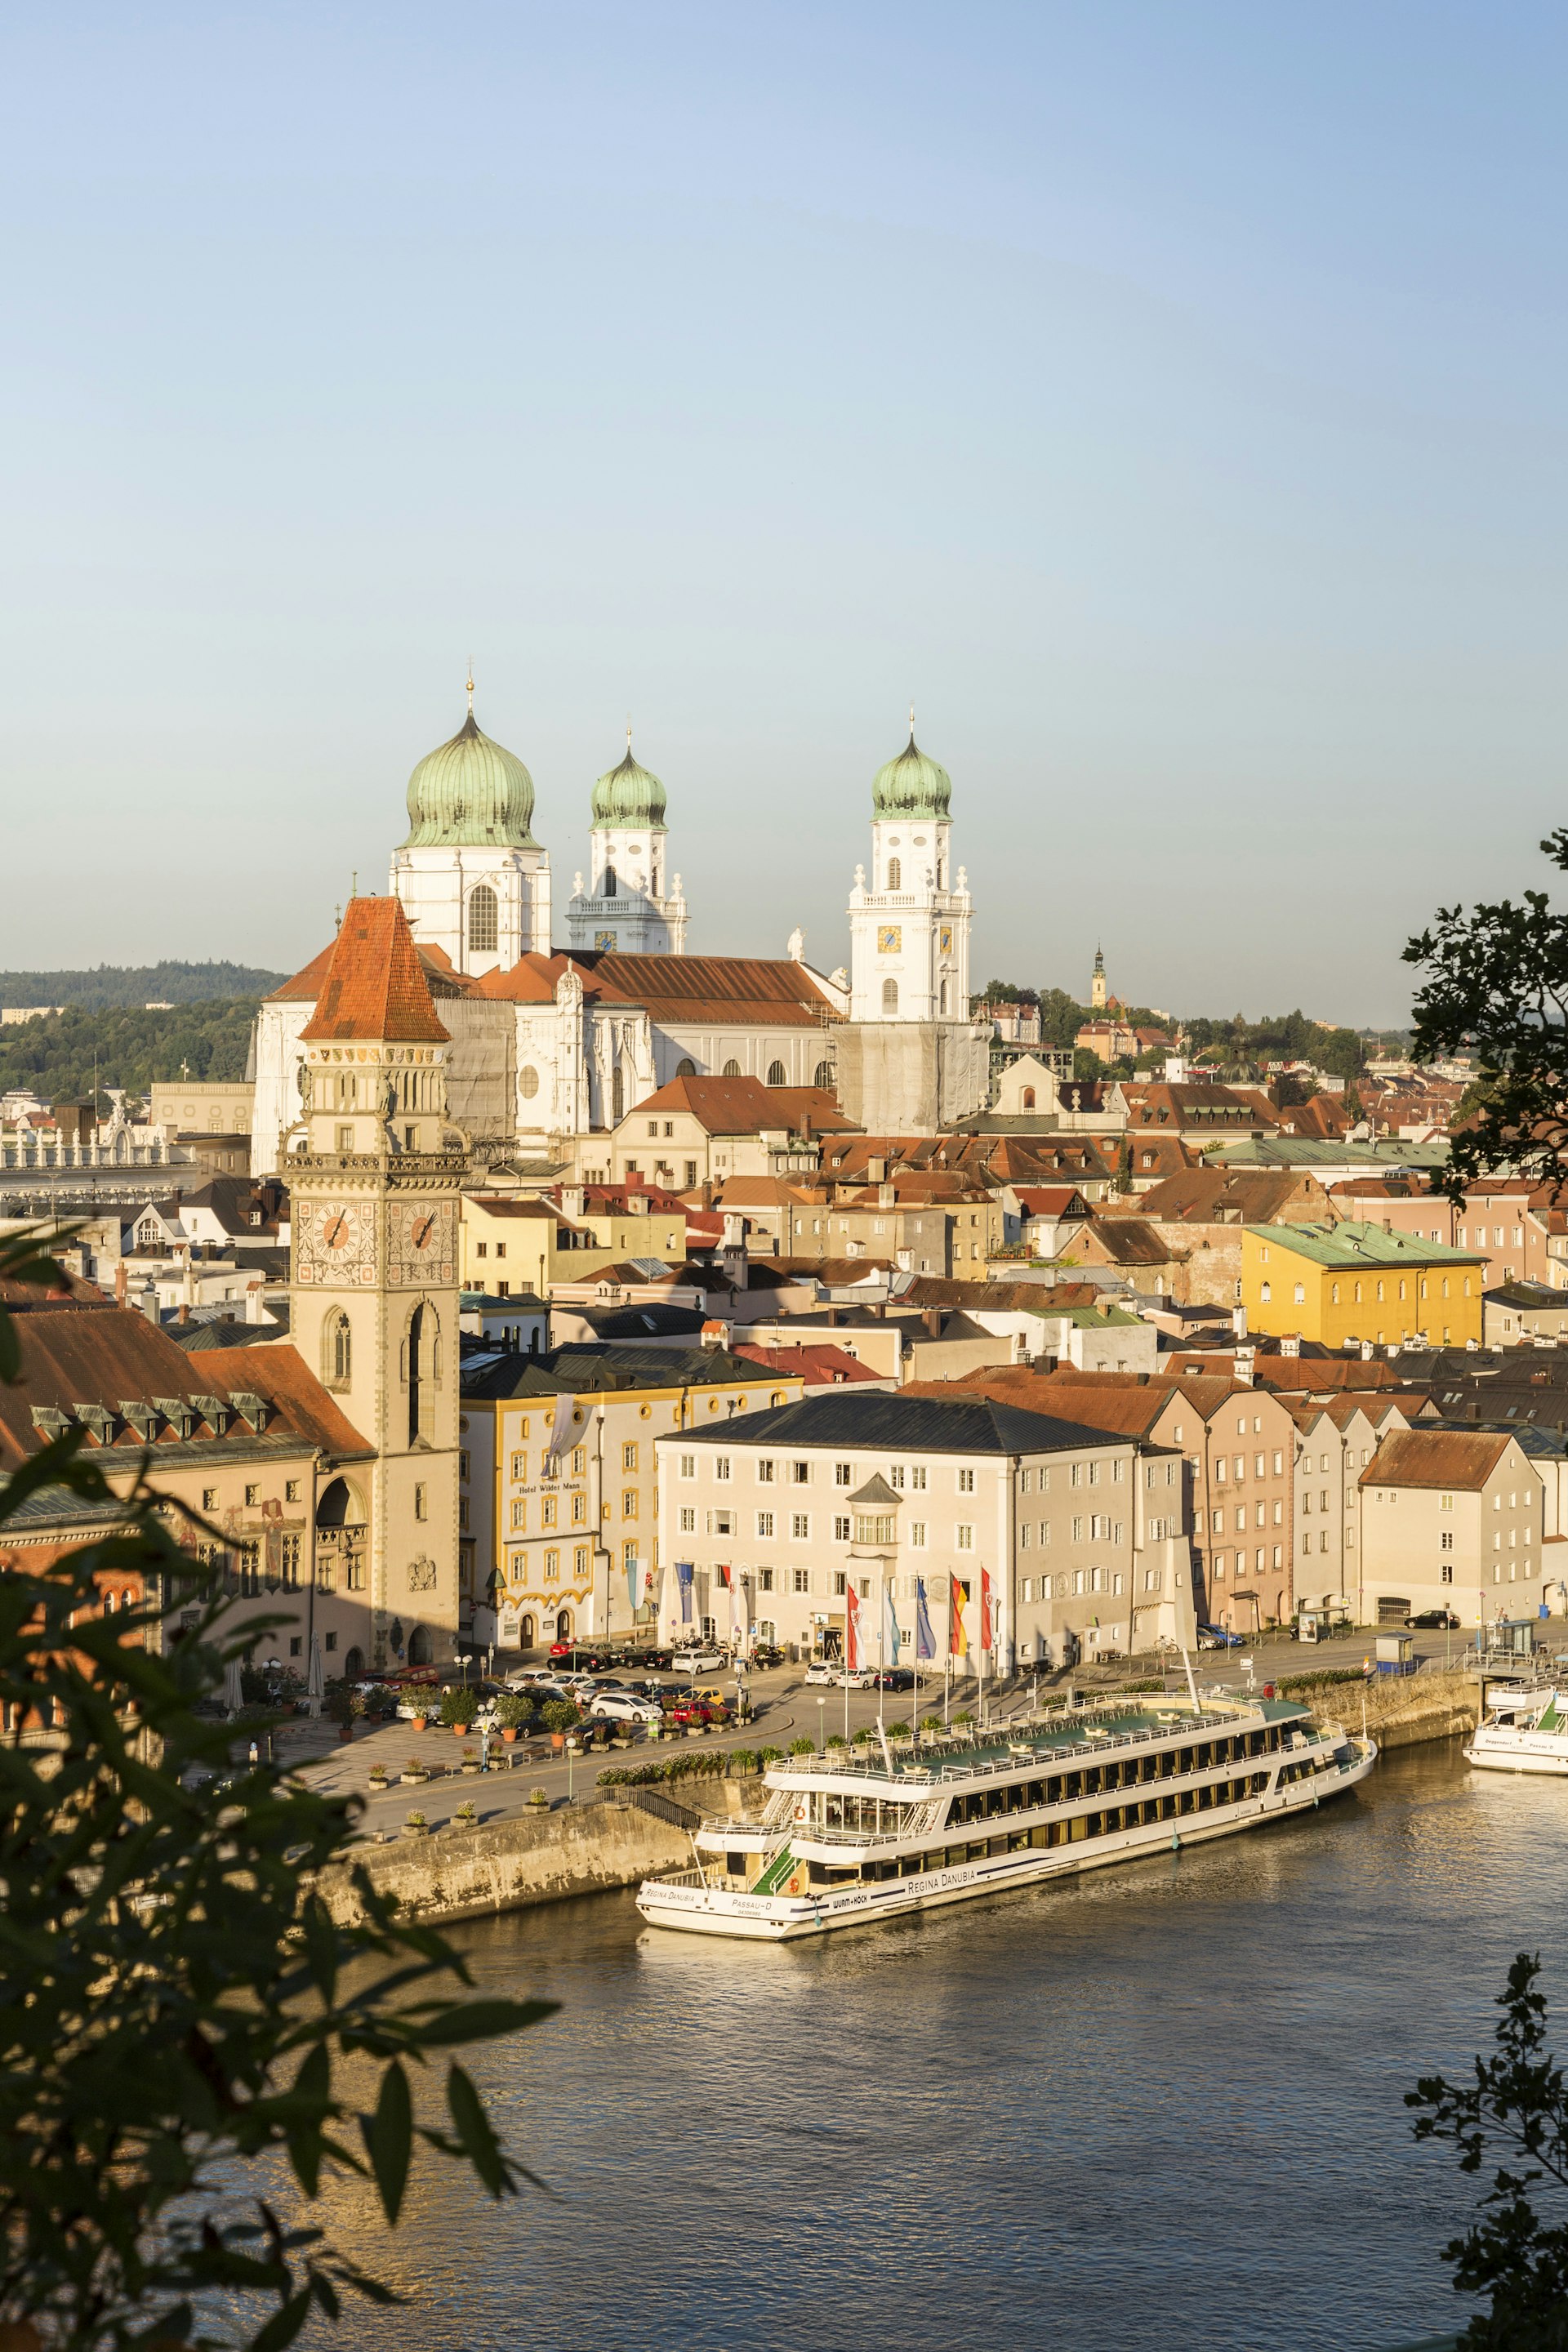 Sunset's golden light signs on the Italianite city of Passau and the Danube river.